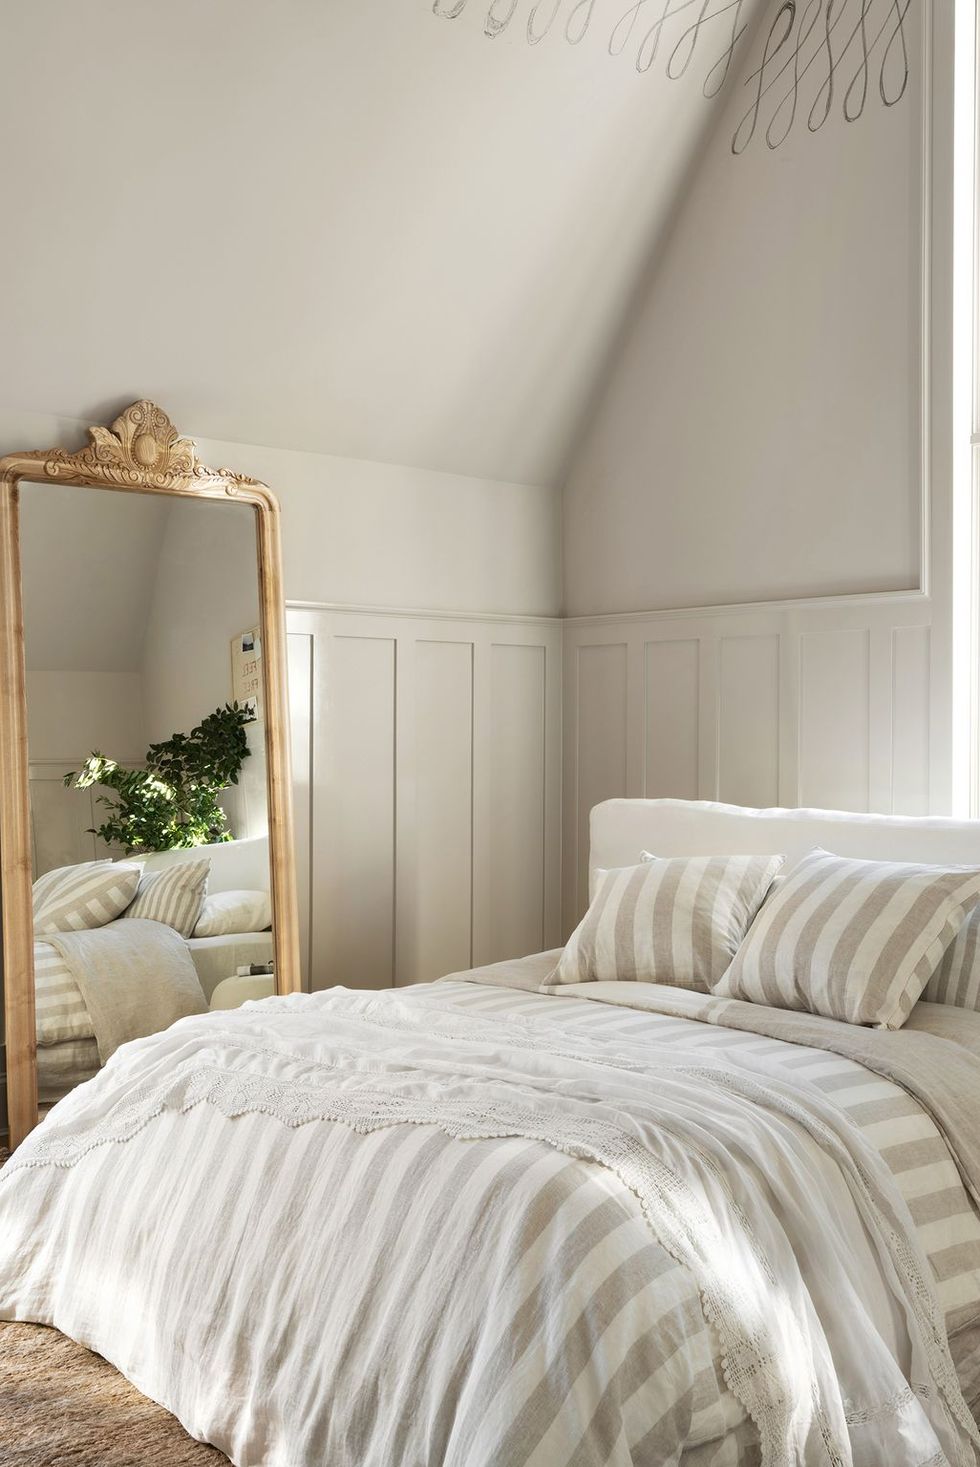 10 Vintage Bedroom Ideas That Are Timeless